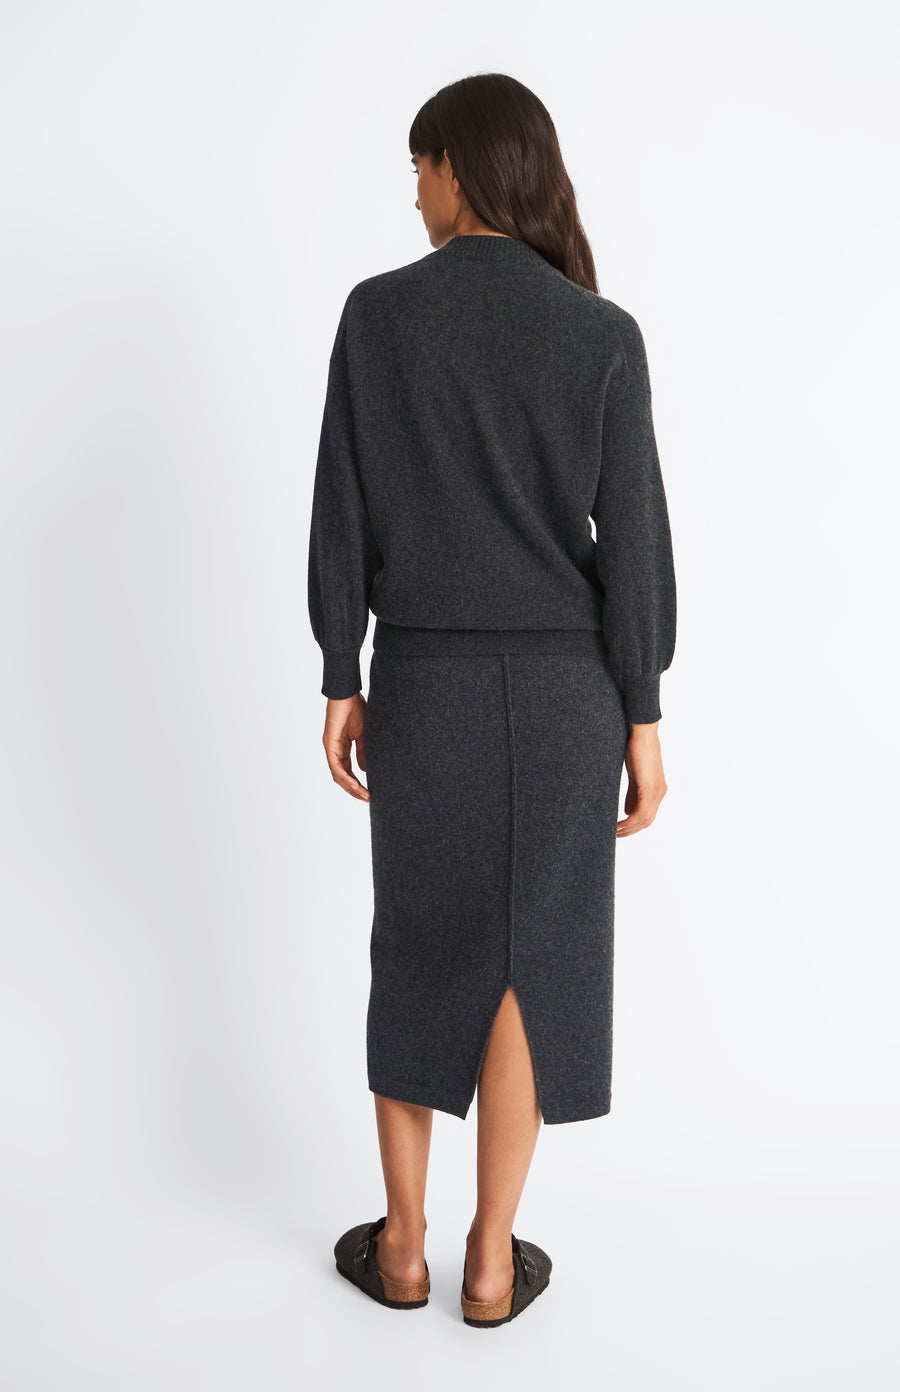 Pringle of Scotland Cashmere Blend Pencil Skirt in Charcoal back view